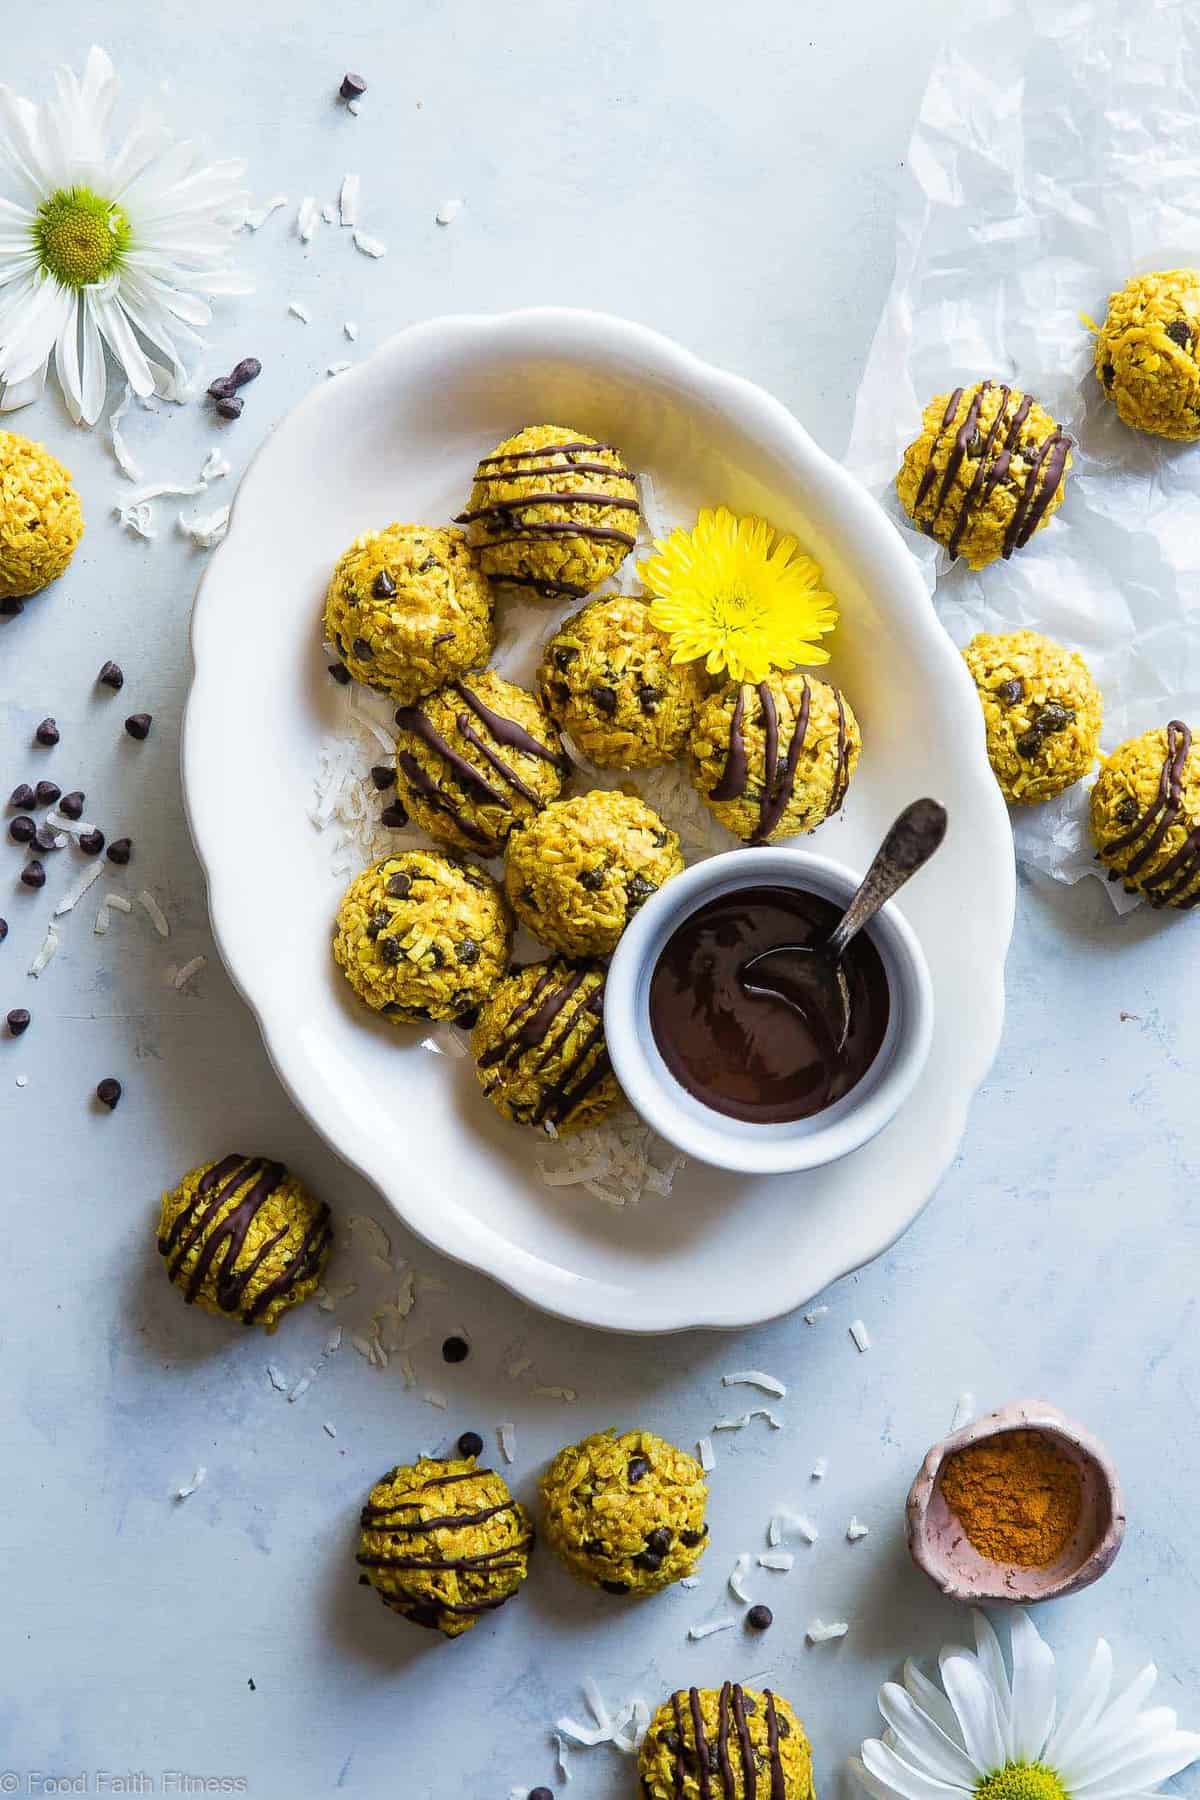 Healthy No Bake Cookies with Coconut Oil -  These easy, 6 ingredient cookies have addicting spicy-sweet flavors from turmeric, almond butter and chocolate chips! They're a paleo, vegan and gluten free treat that is secretly anti-inflammatory! | #Foodfaithfitness | #Paleo #Vegan #Glutenfree #Dairyfree #Healthy